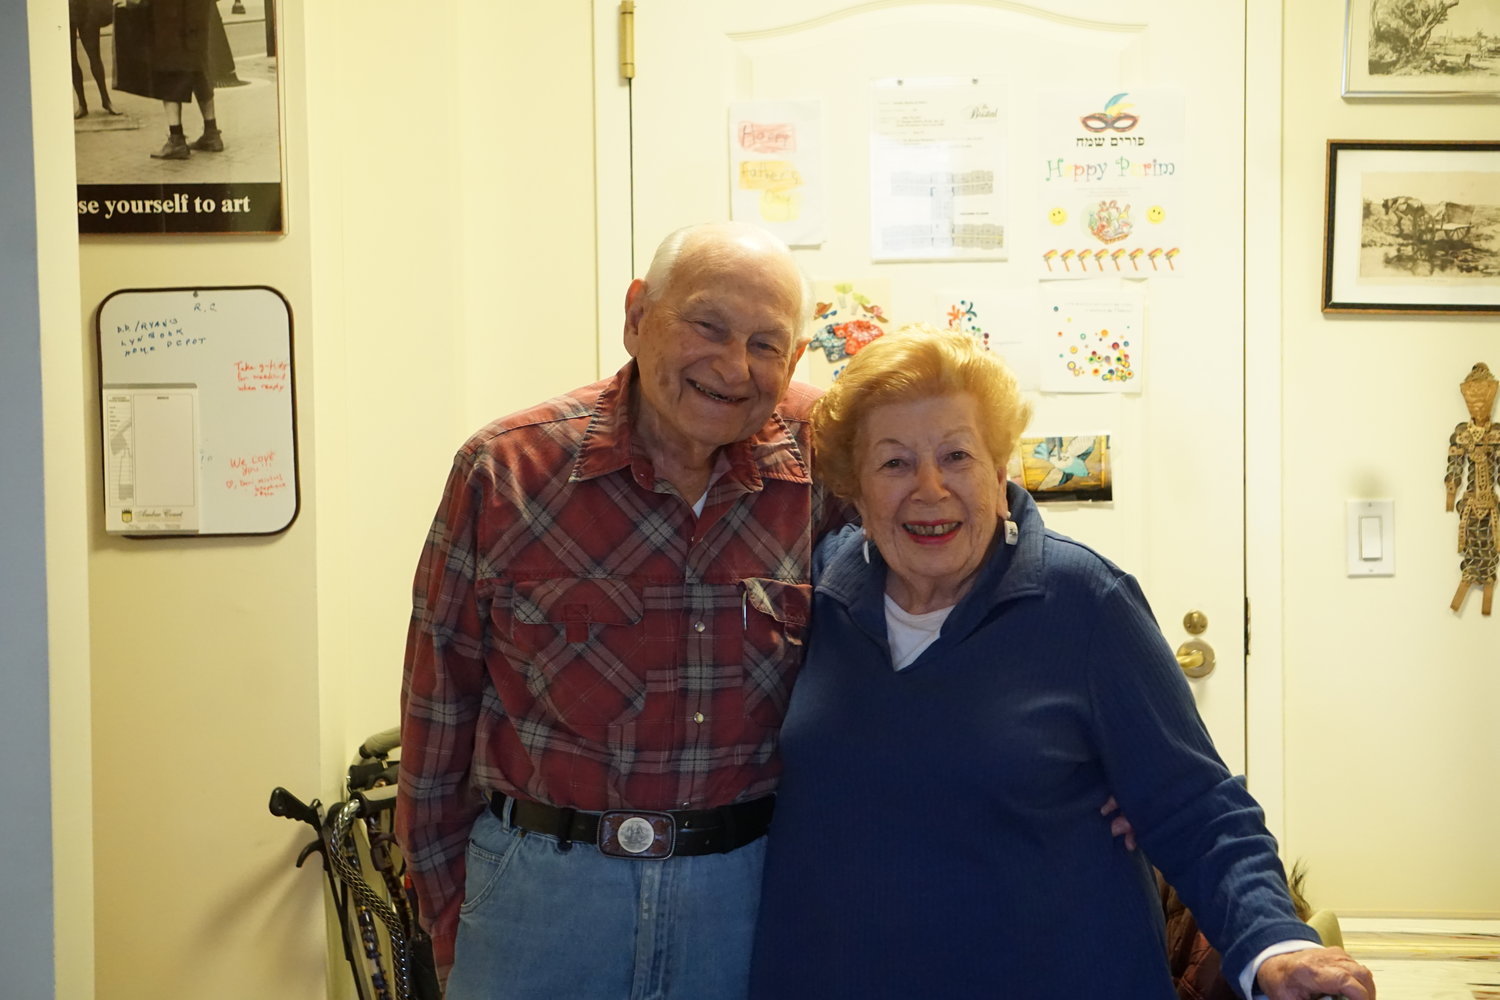 Helen and Martin Inwald currently live at the Bristal North Woodmere. They were married in 1948.